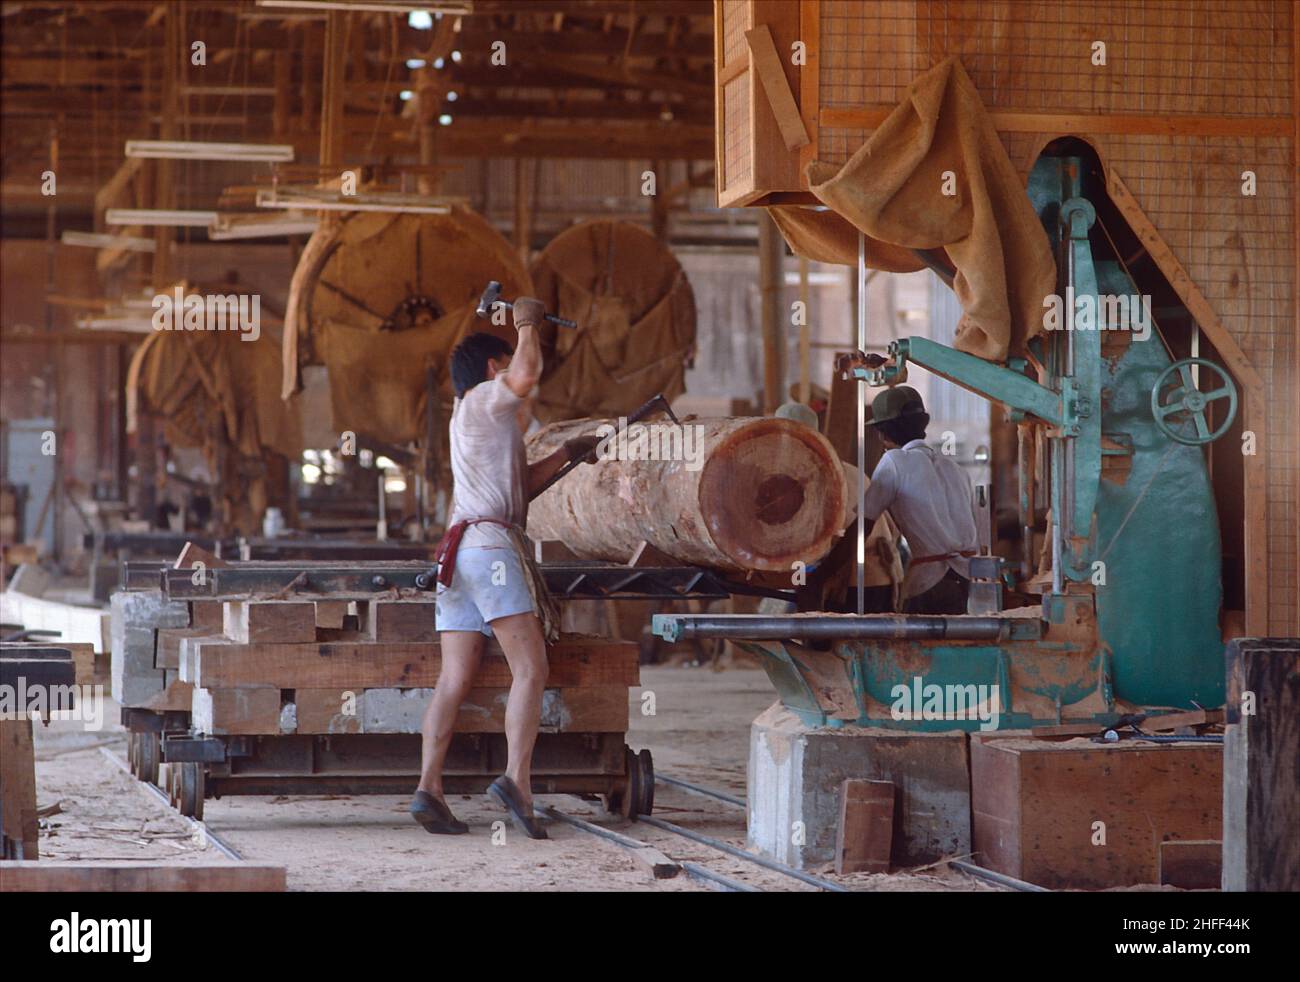 Sawmillworker slicing a heavy log with a belt saw  in a sawmill near Accra, Ghana, West Africa. Stock Photo